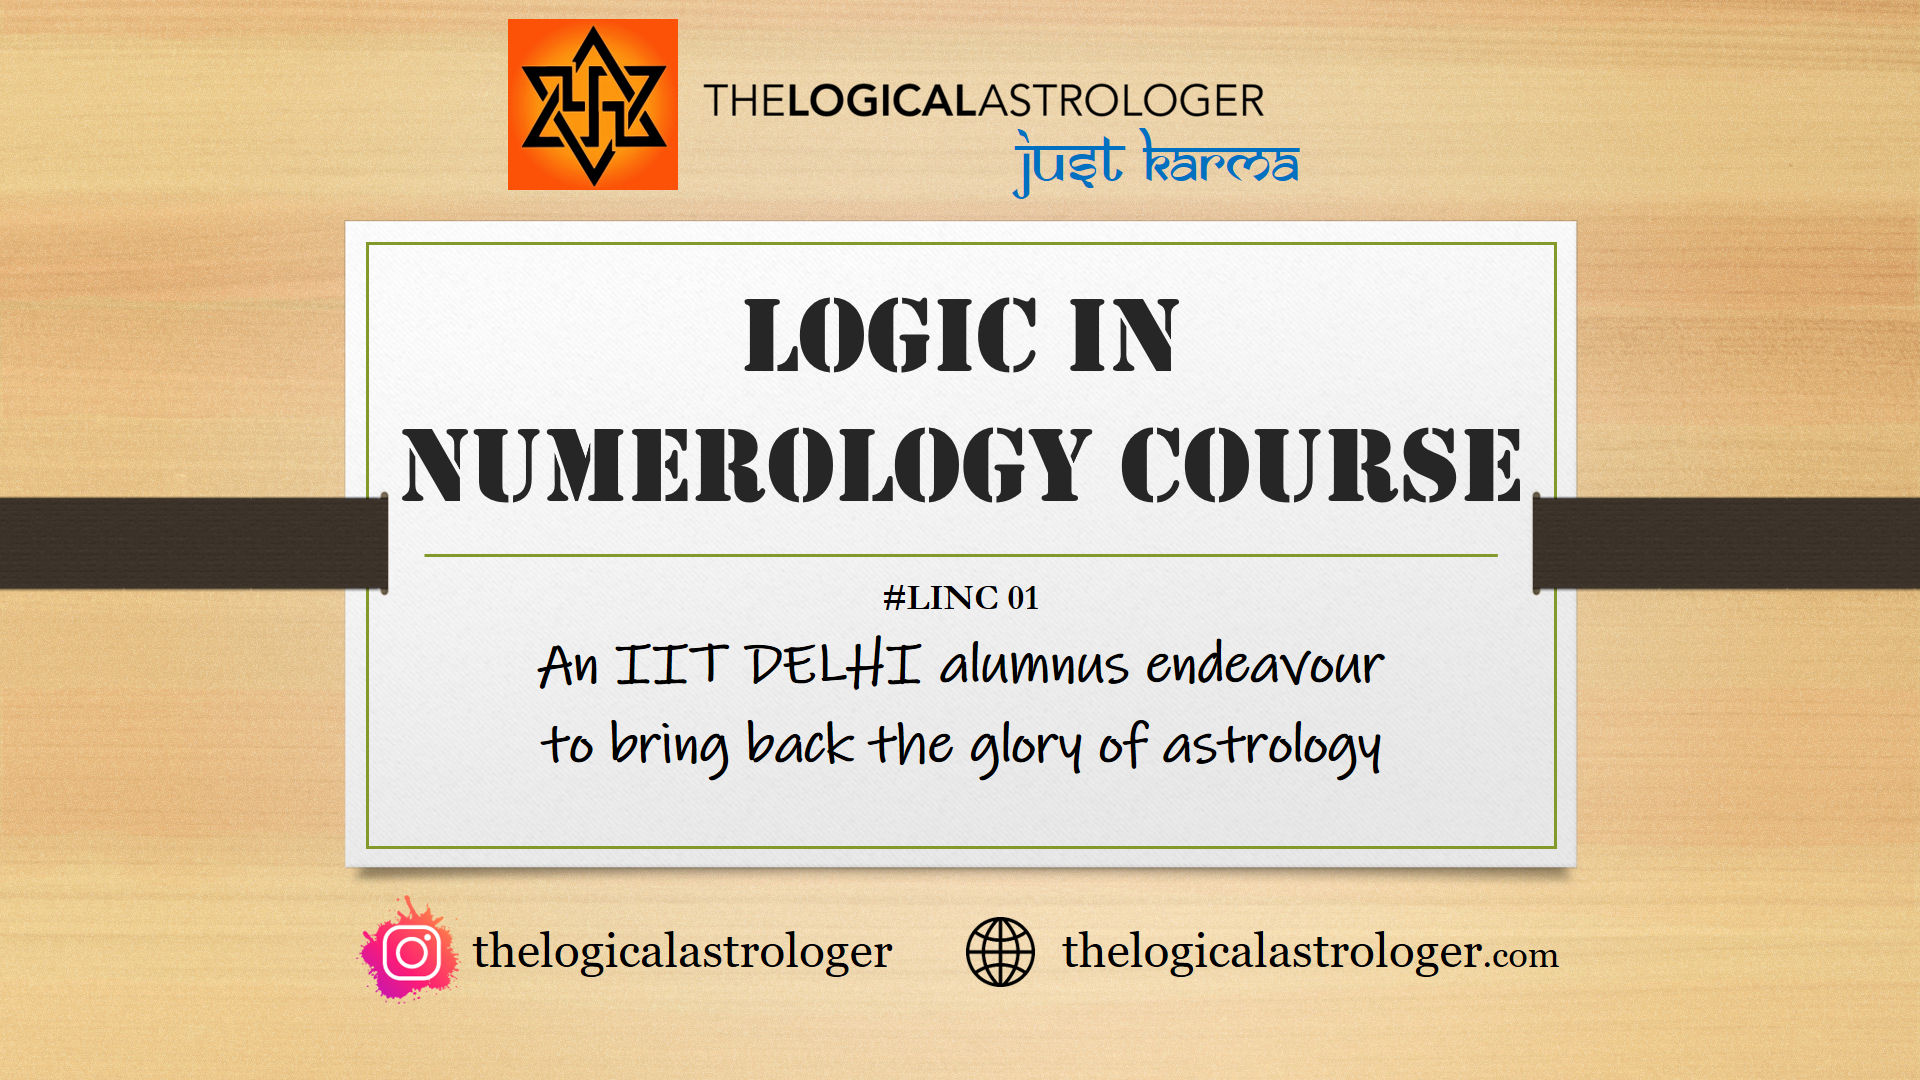 LOGIC IN NUMEROLOGY COURSE